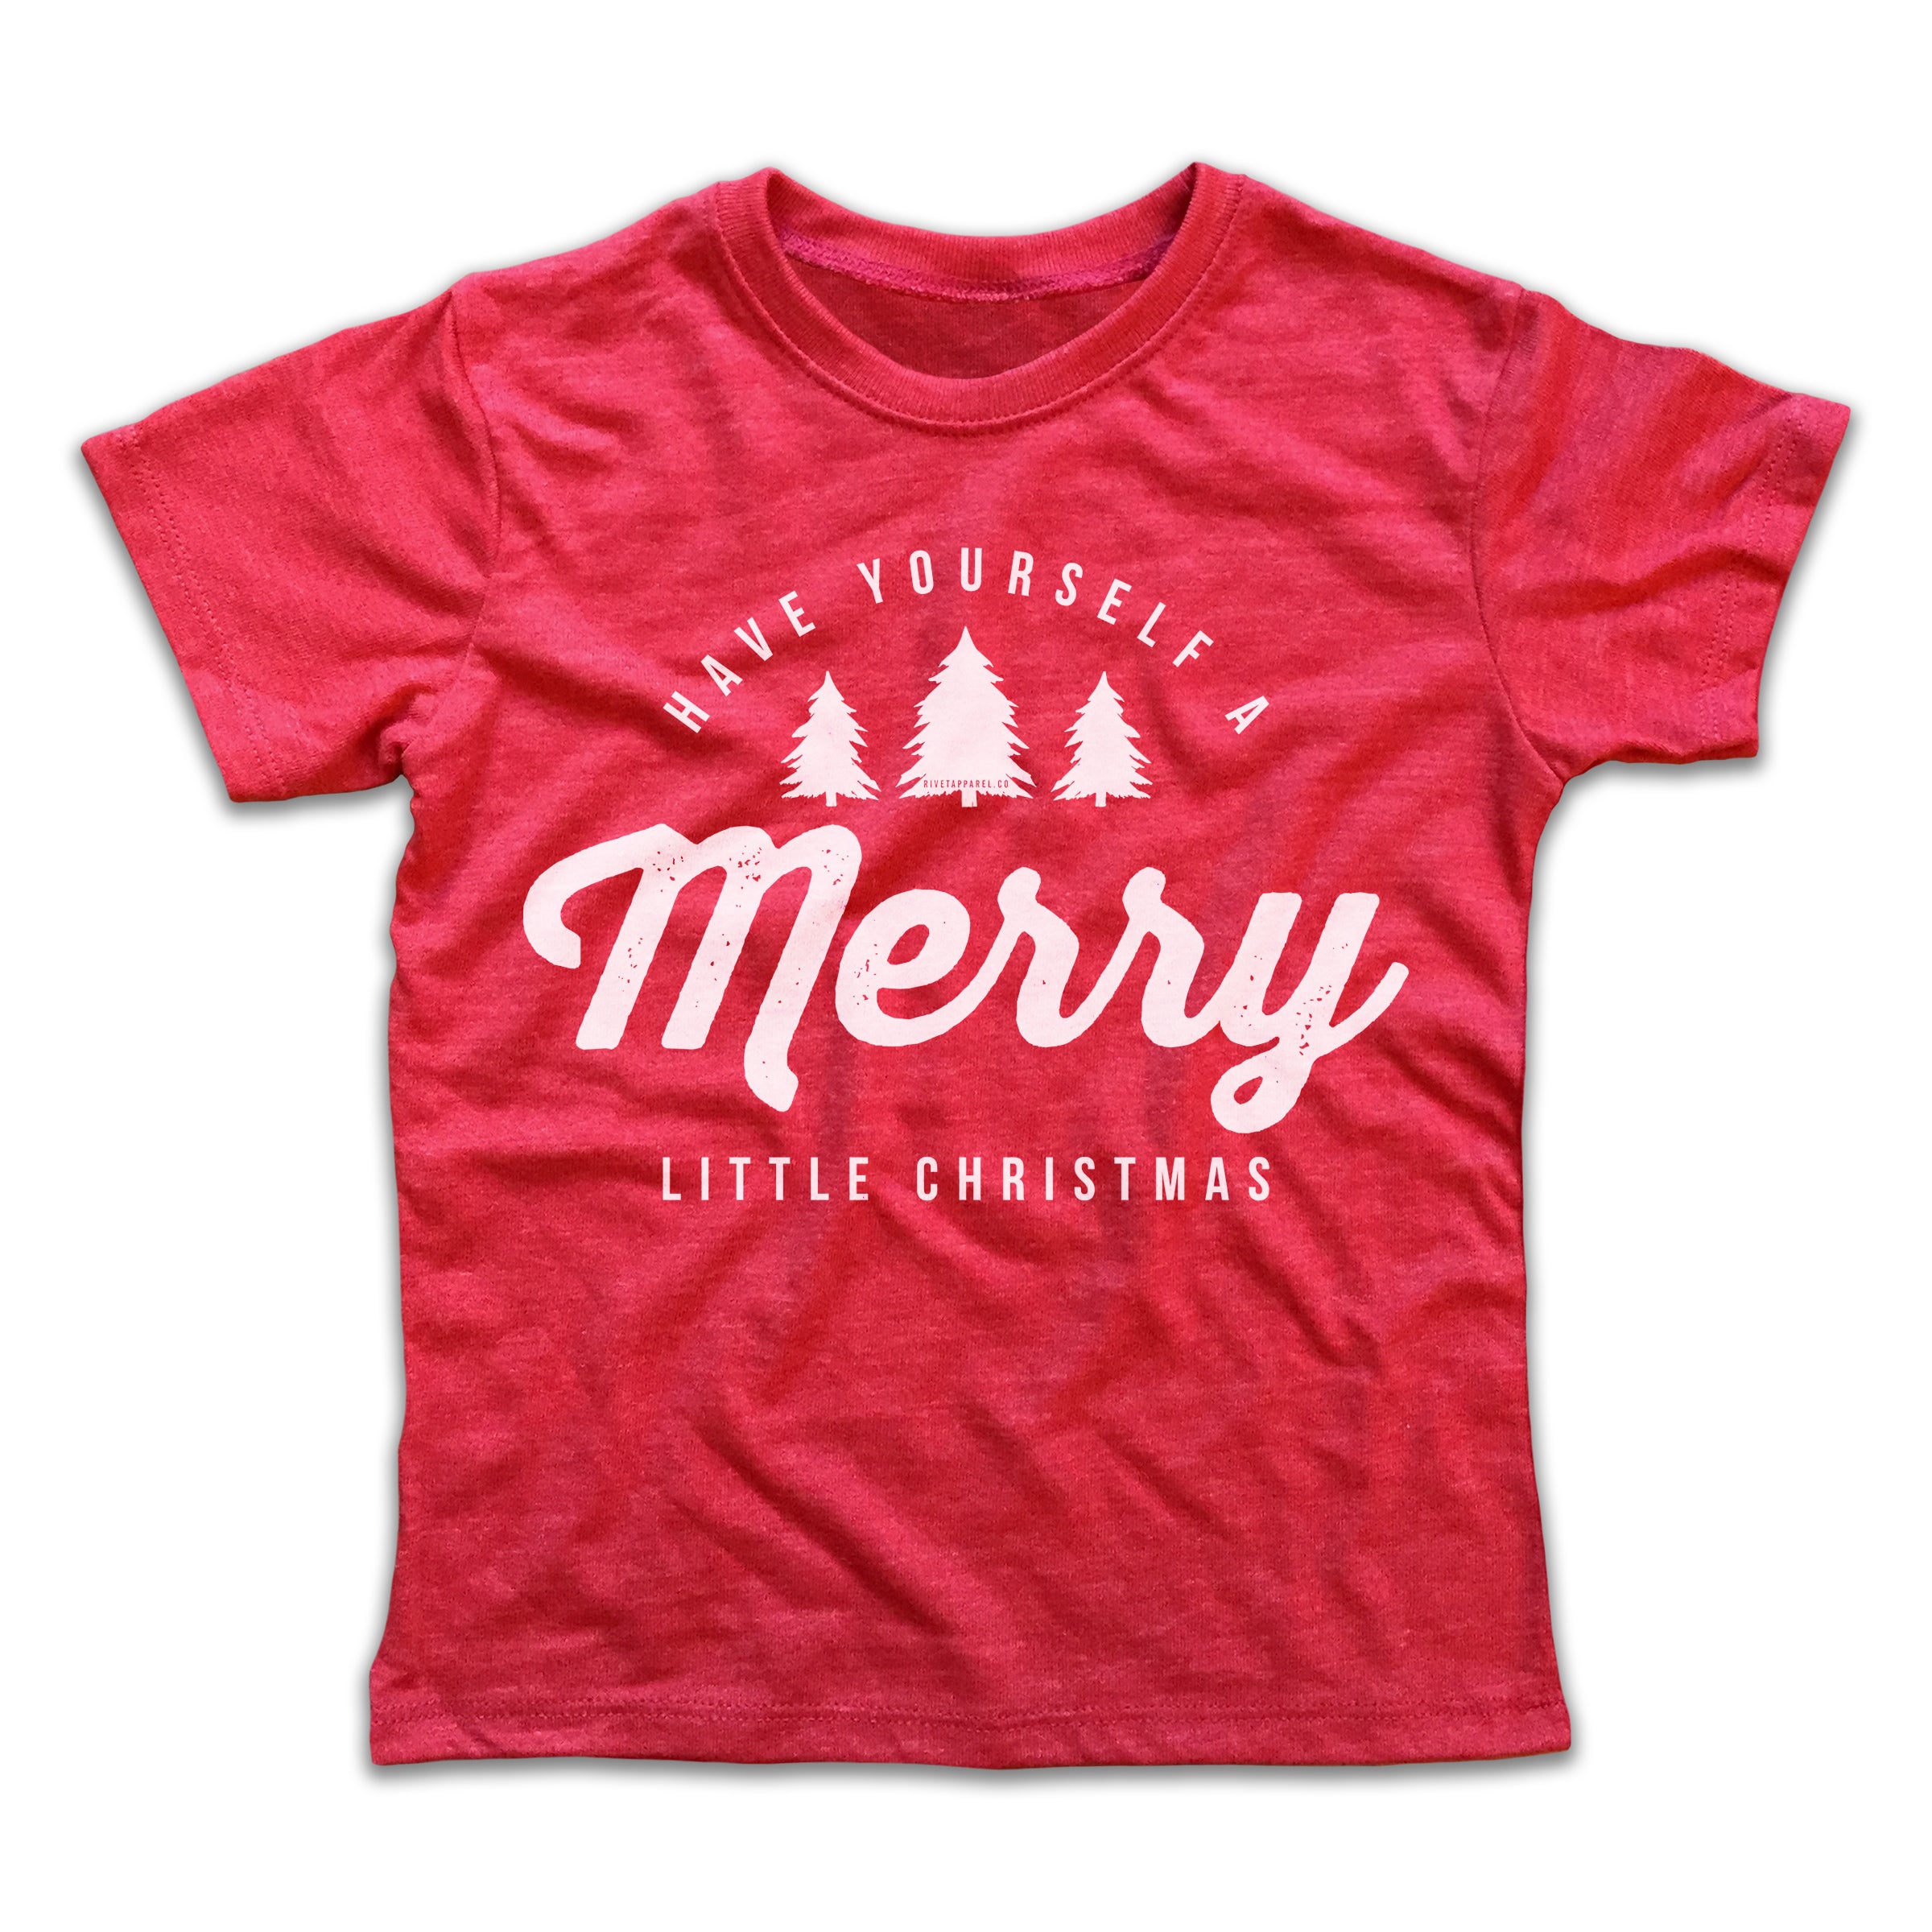 Merry Little Christmas 55240-12 Red - 752106649200